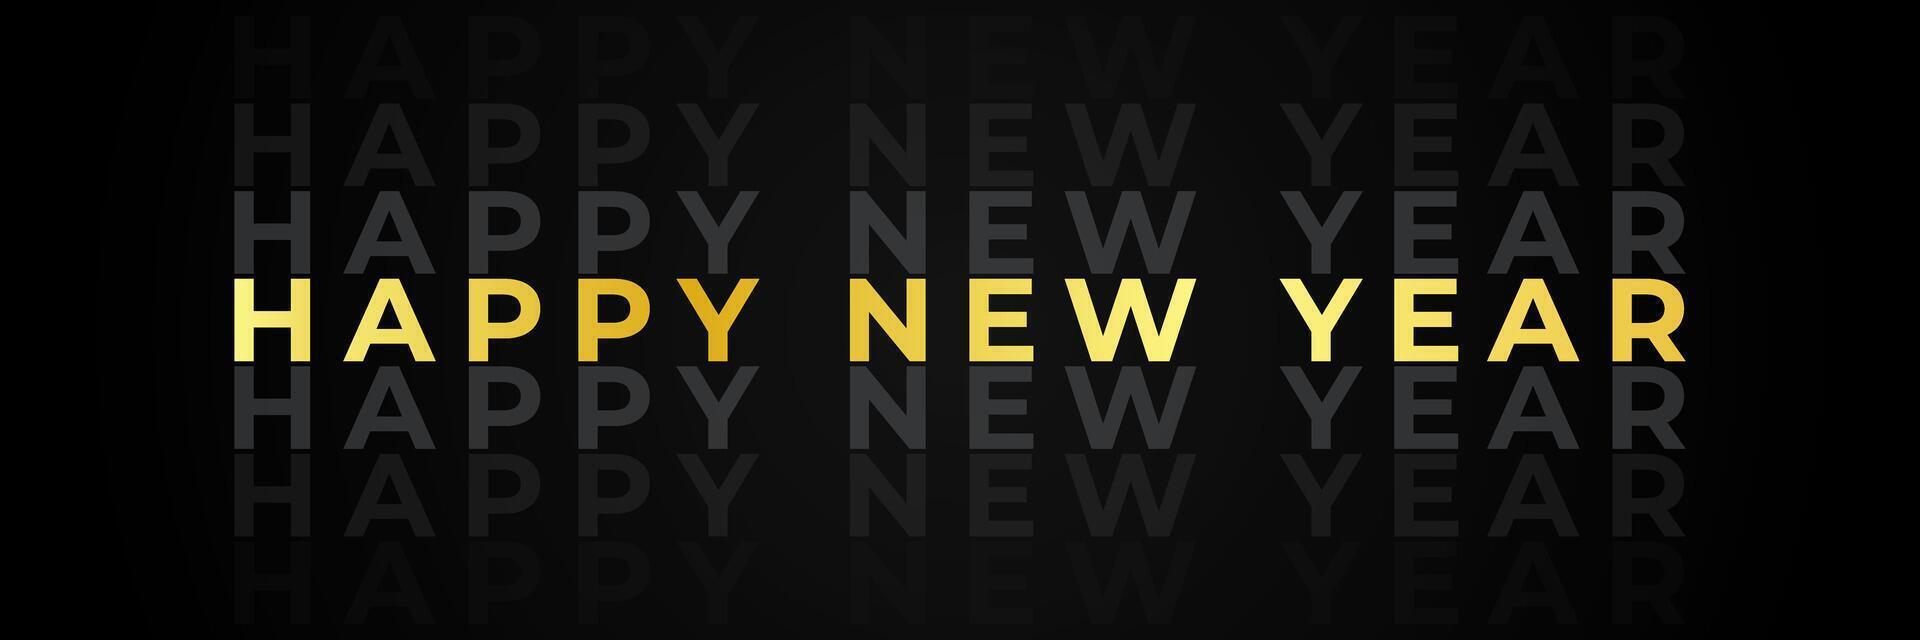 abstract happy new year banner template design vector